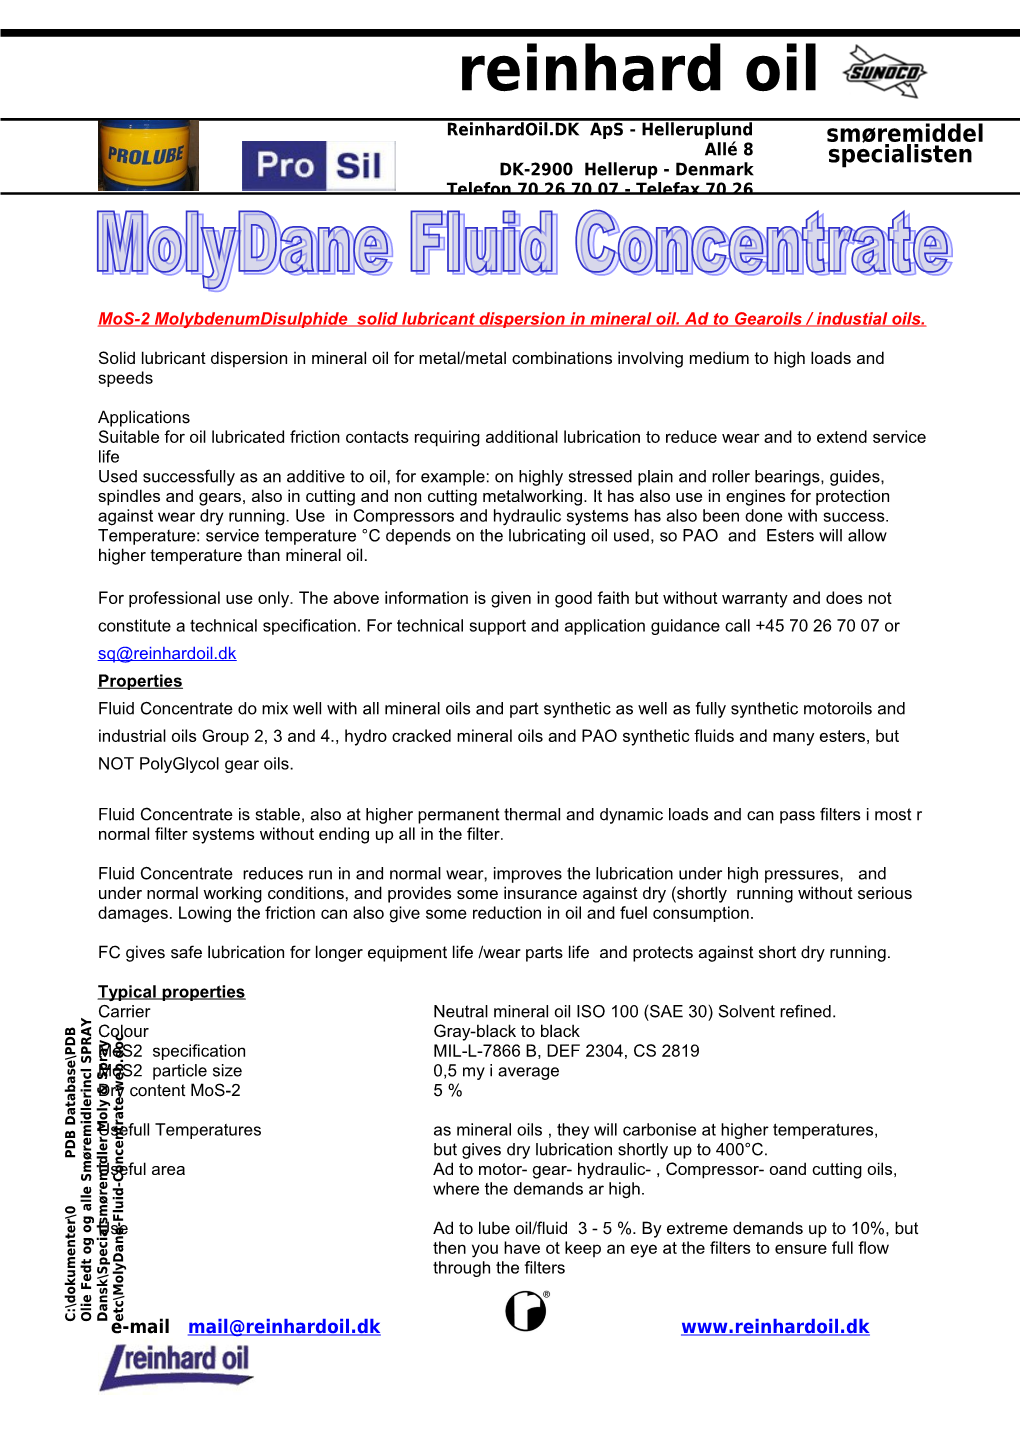 Molydane Fluid Concentrate Mos-2 in Mineral Oil